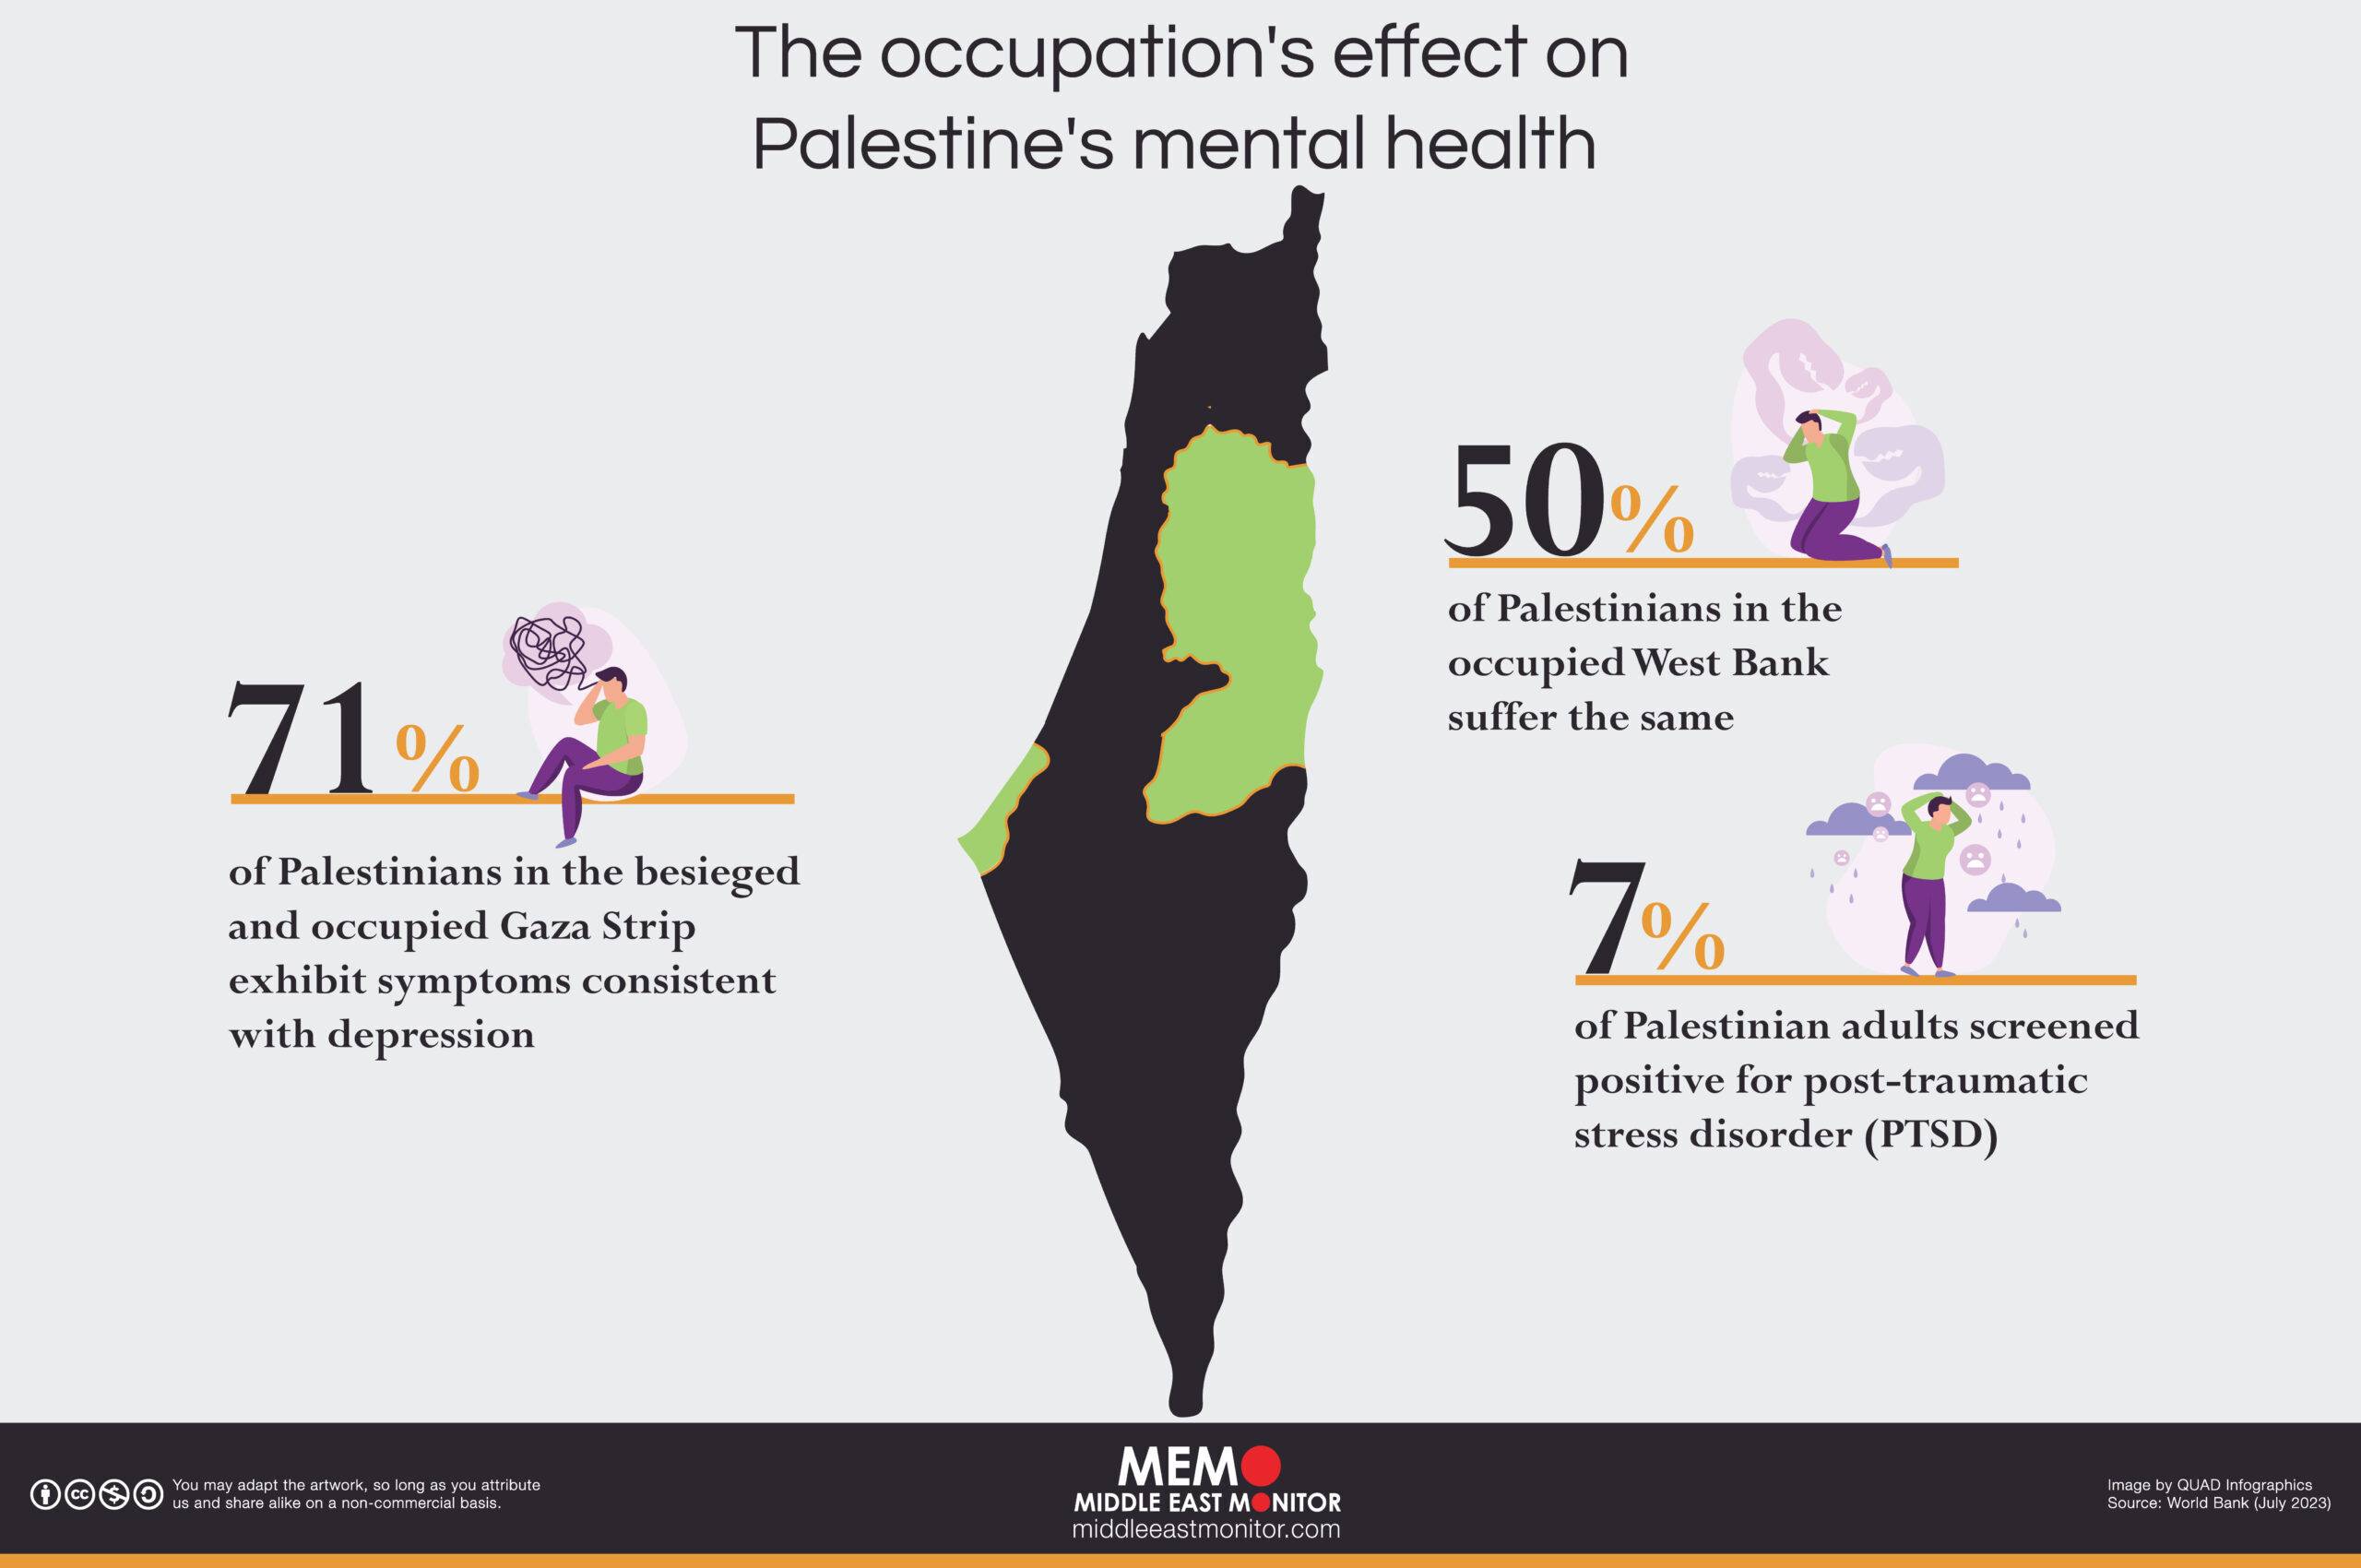 The occupation's effect on Palestine's mental health